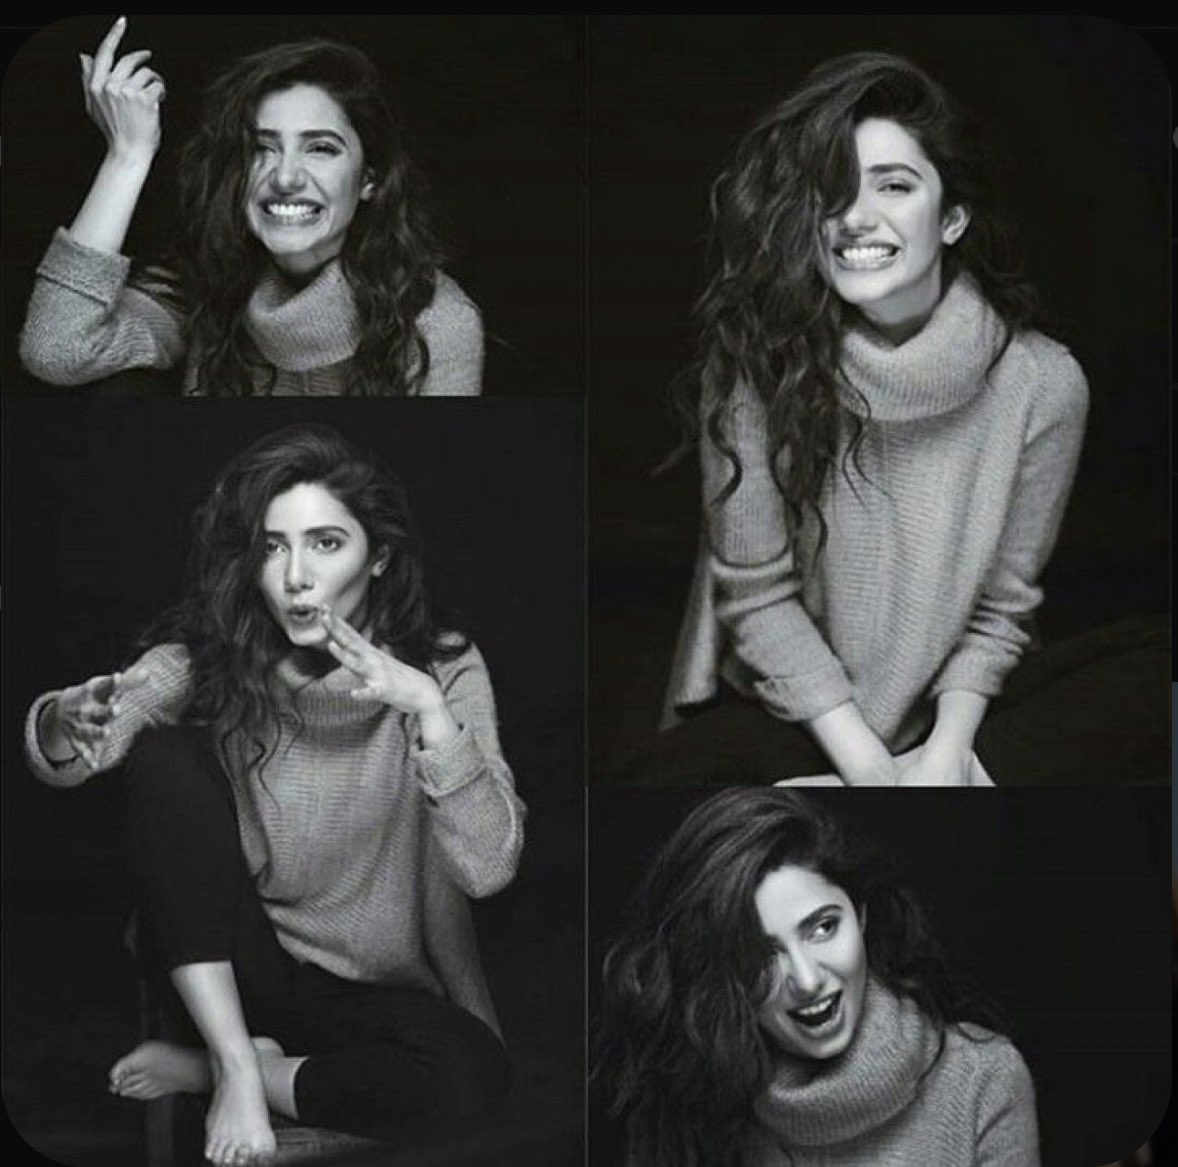 There was a time actors had simple portraits taken showing there normal self now you get those badly done photoshoots with zero creativity or novelty.
This mahira ✨🖤